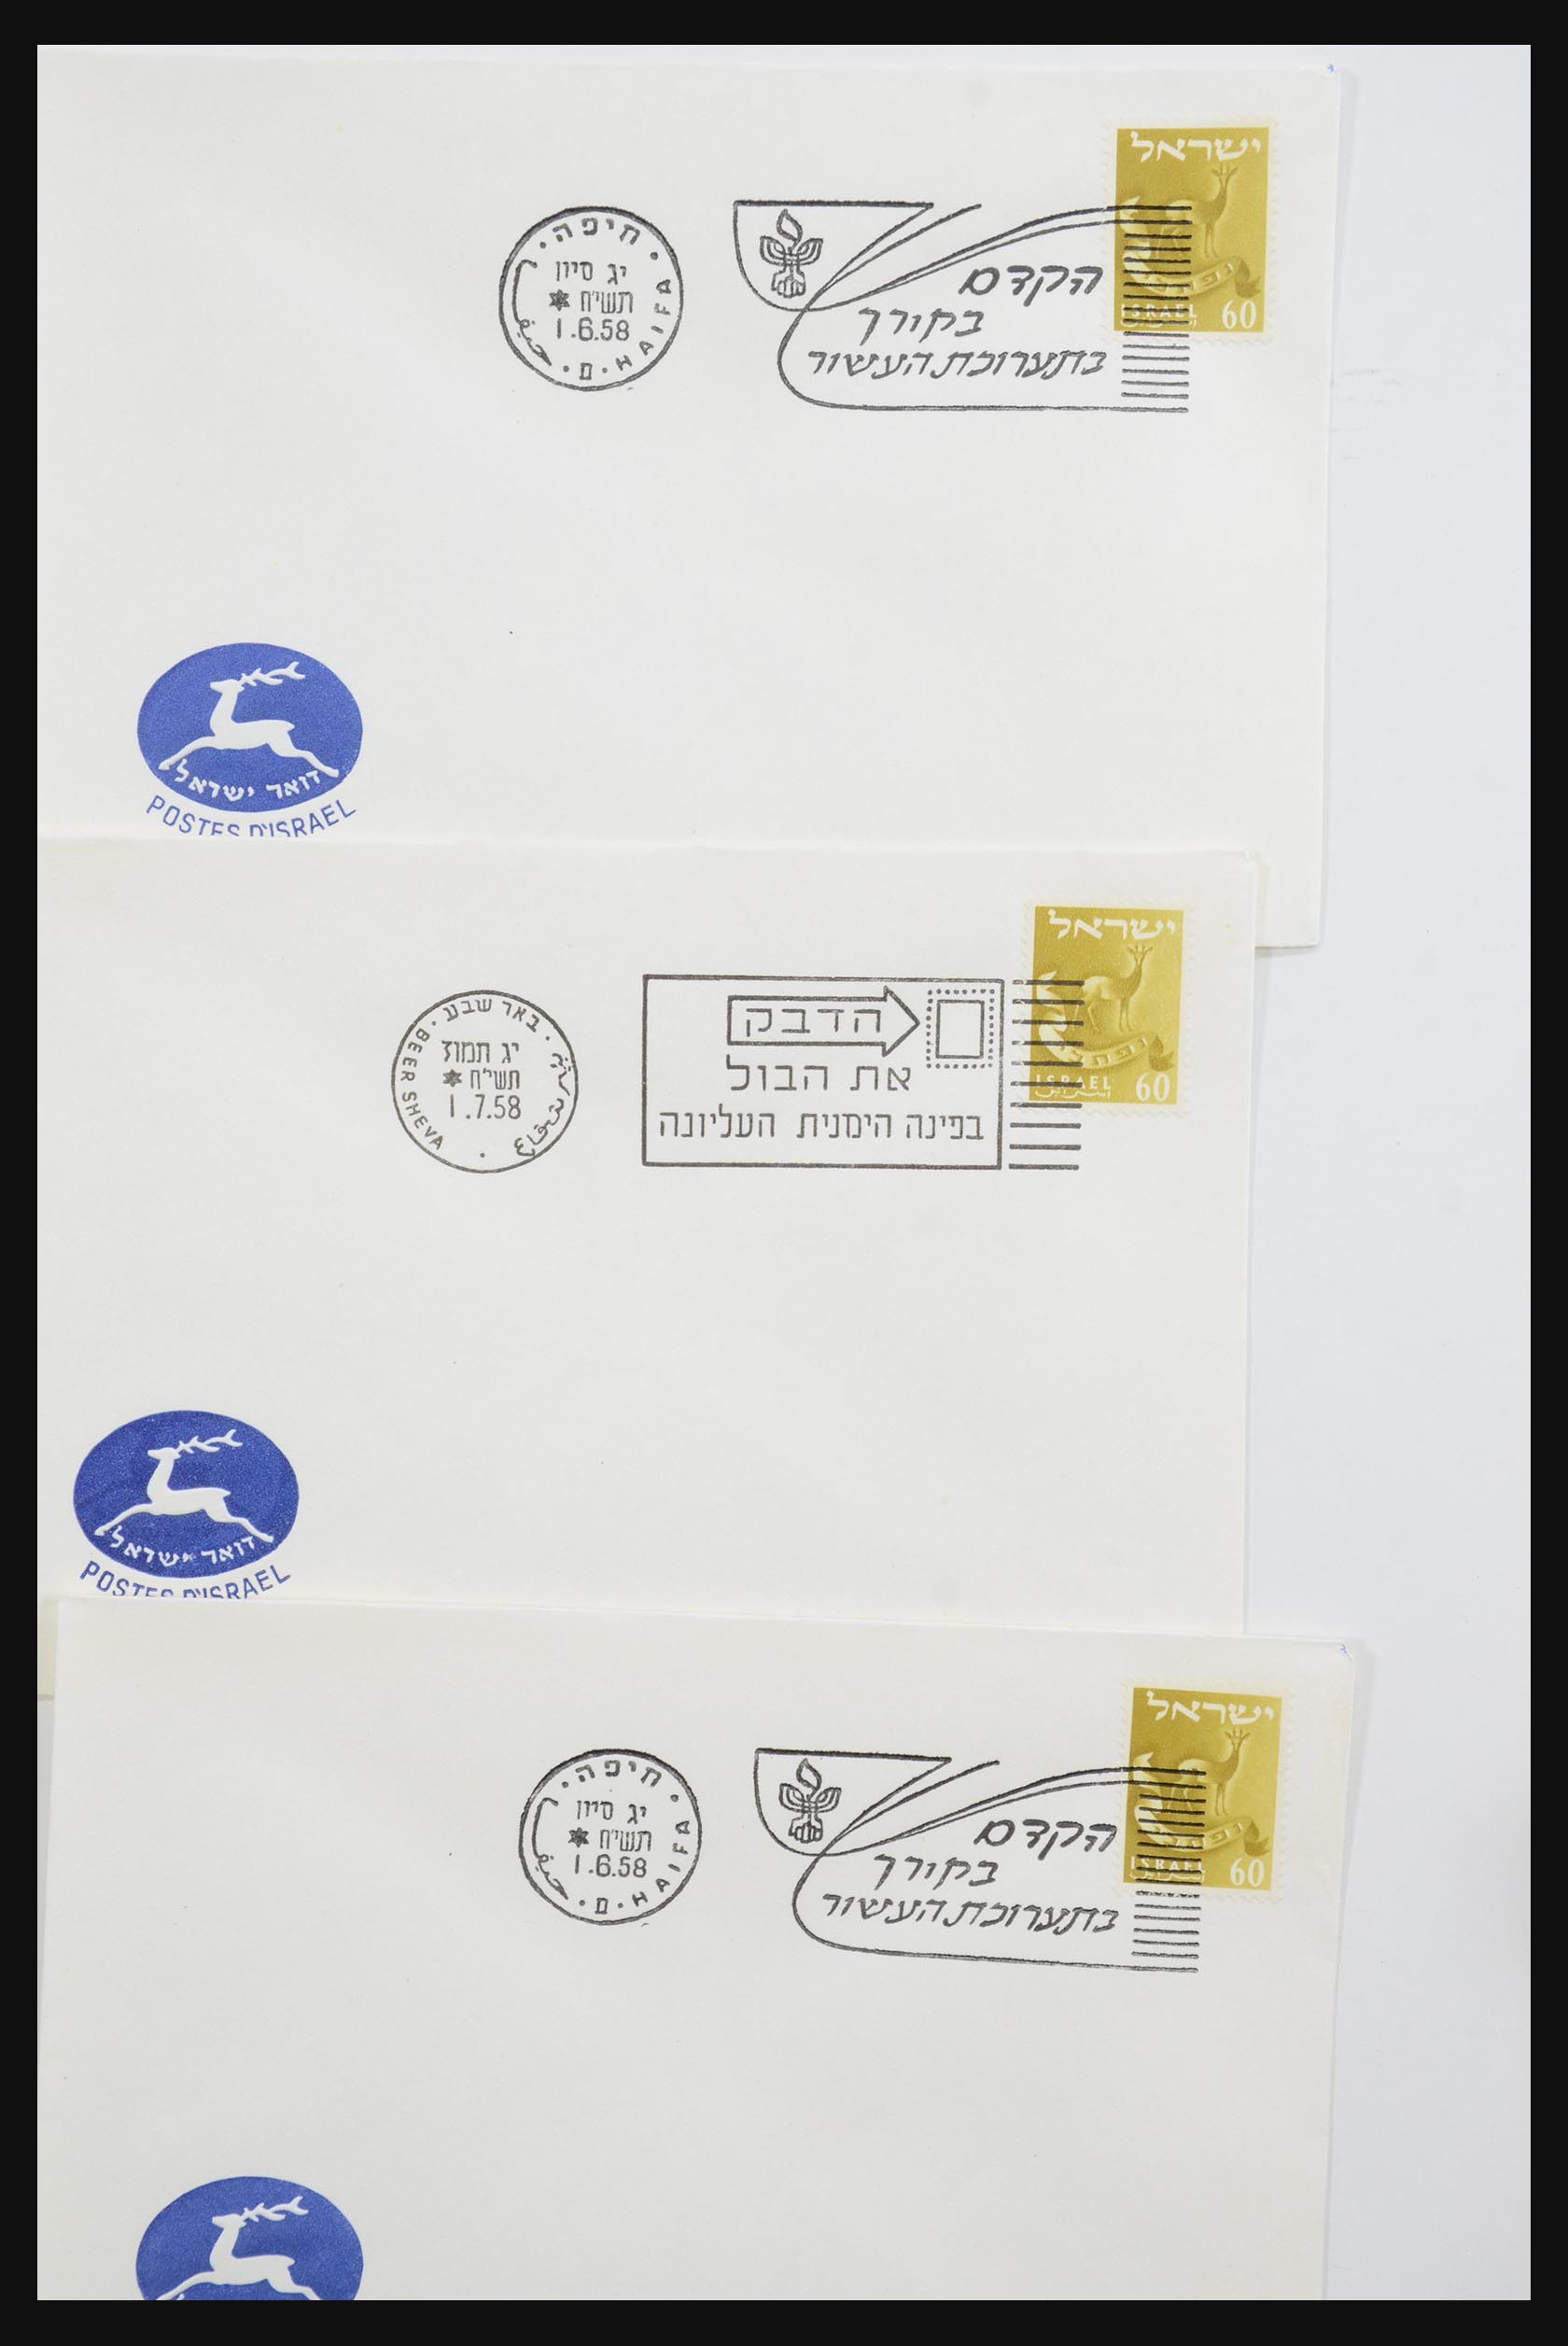 31924 040 - 31924 Israël fdc-collectie 1957-2003.